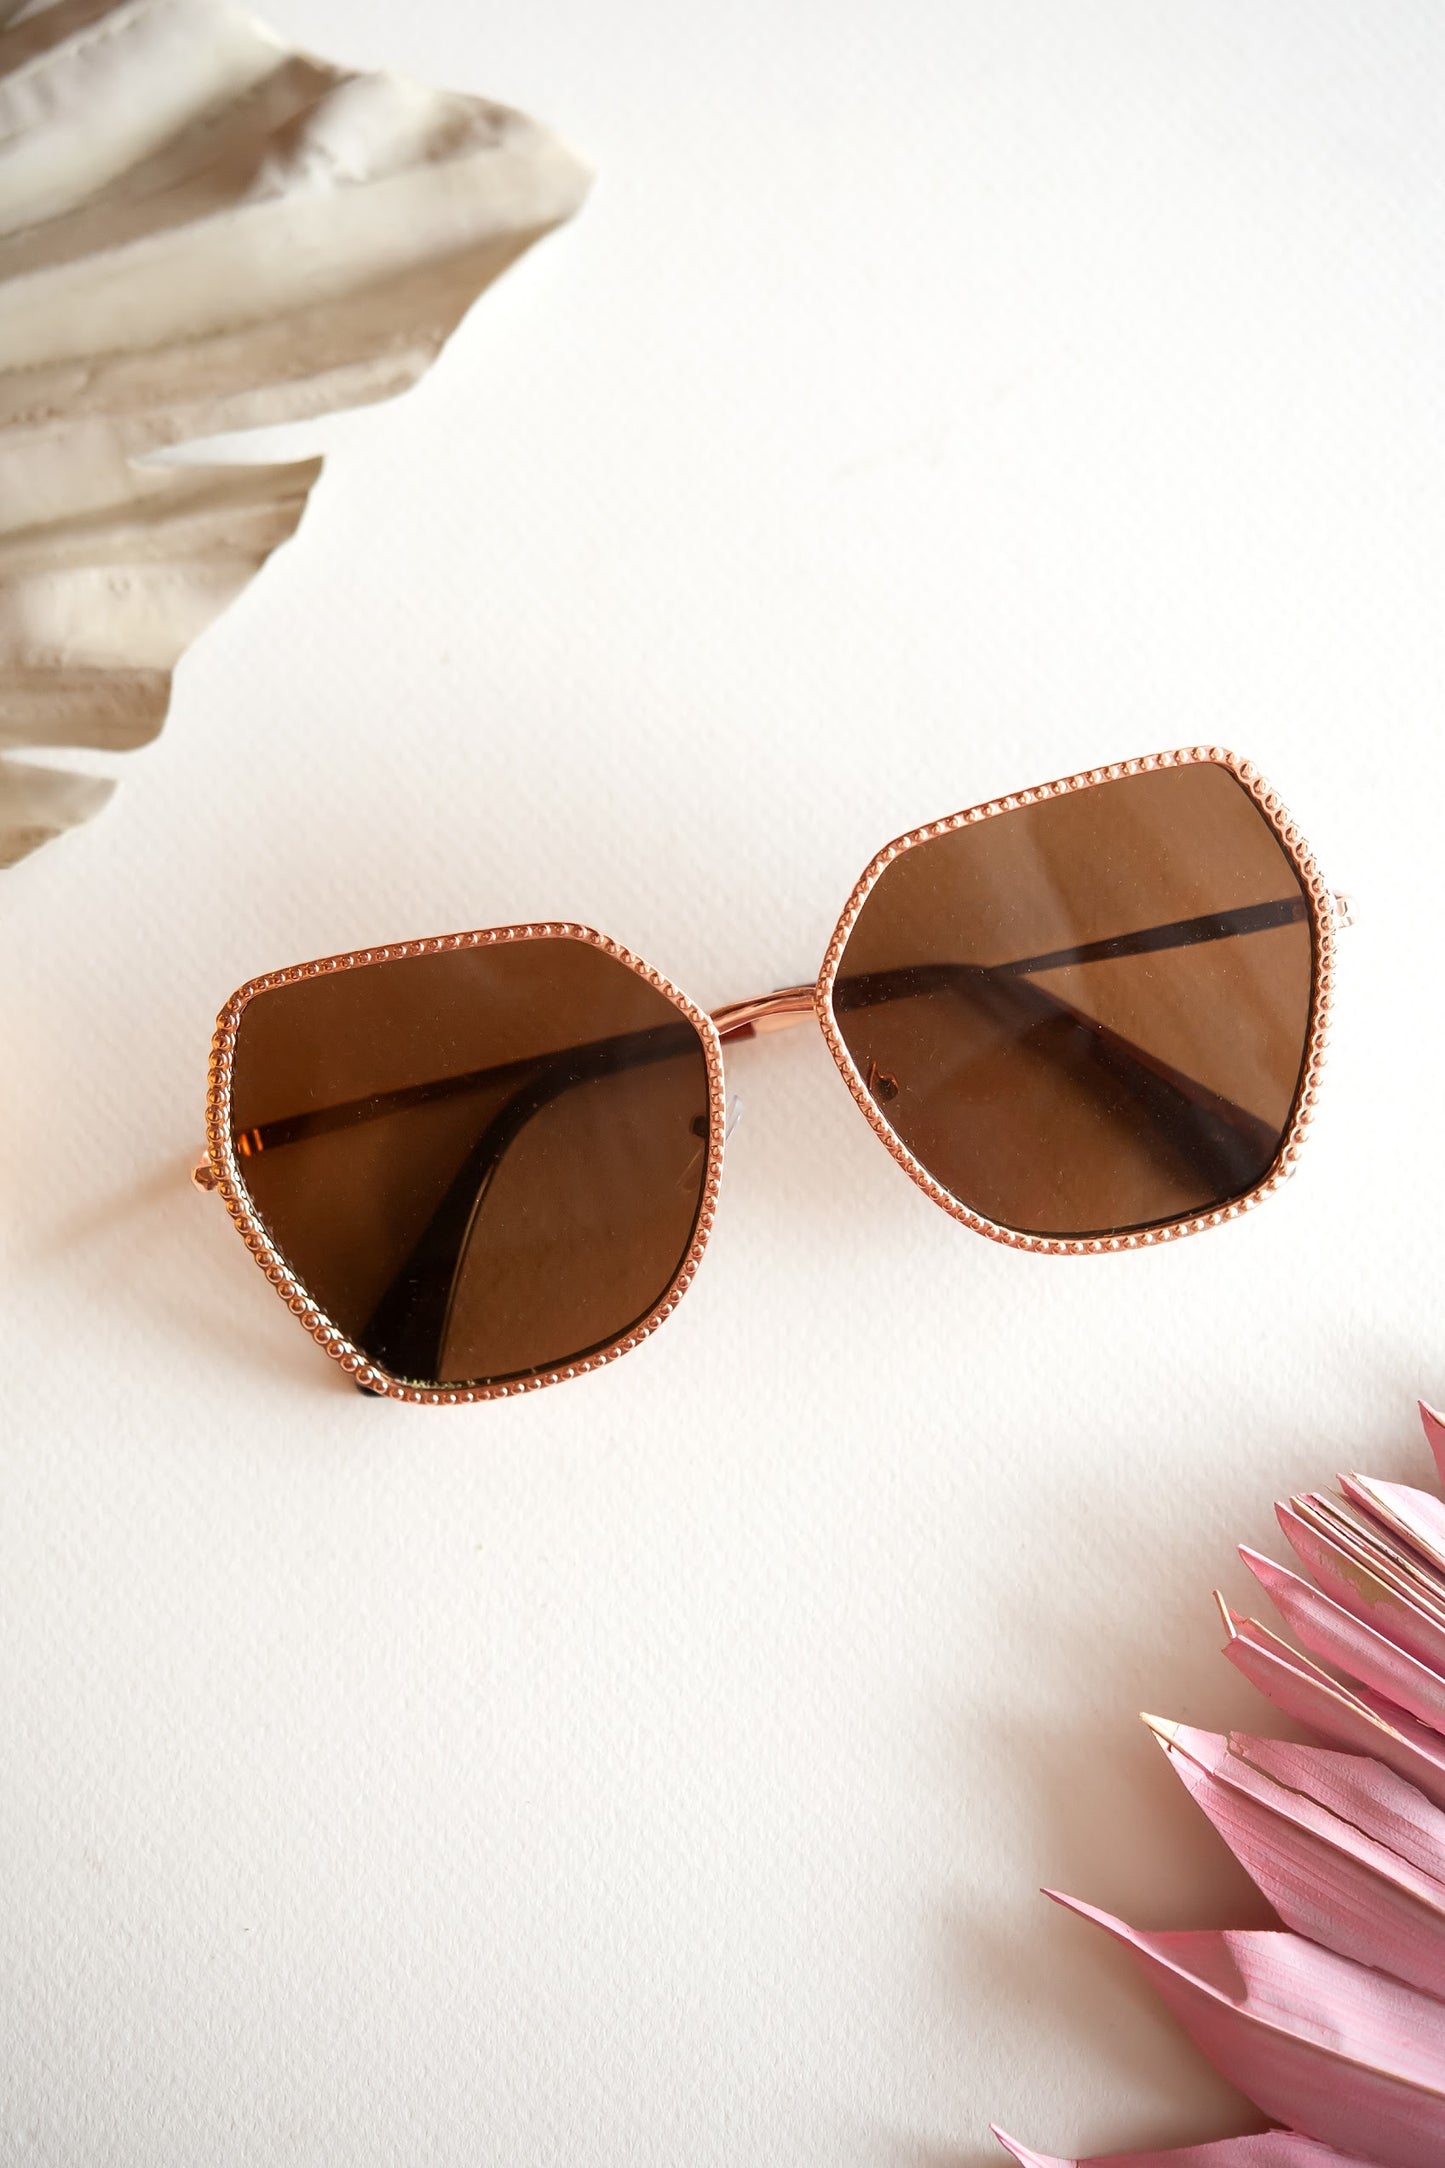 Coastal Cottage Sunnies Collection | Blush Stylish Sunglasses | Boho Chic Beach Babe Sunnies | Pink and Rose Gold Flirty Sunglasses | UV Protection | Brunch Date Pink Sunnies